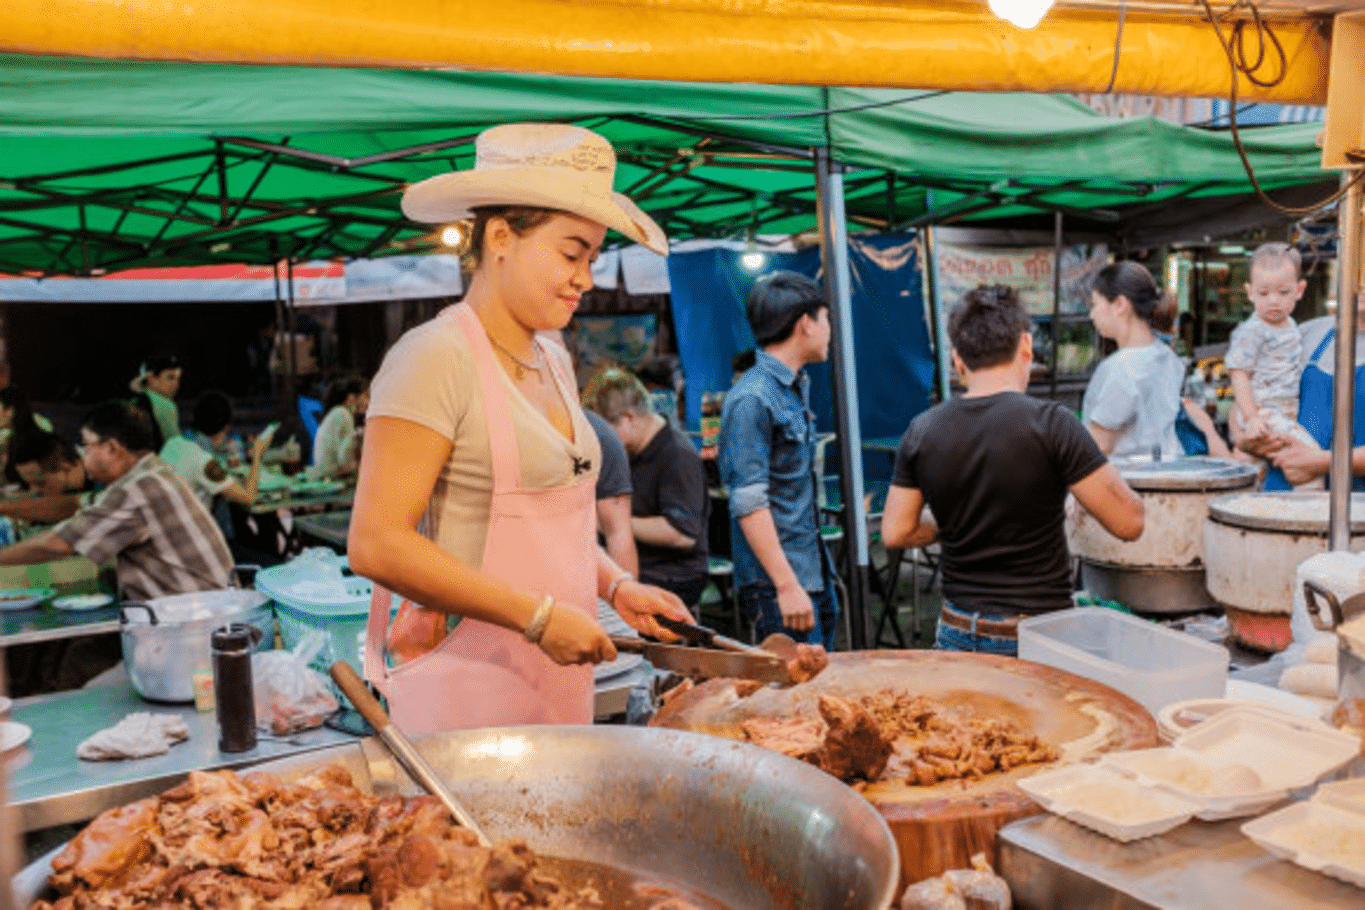 Chiang Mai's Famous 'Cowboy Hat Lady' and the Delights of Lanna Cuisine